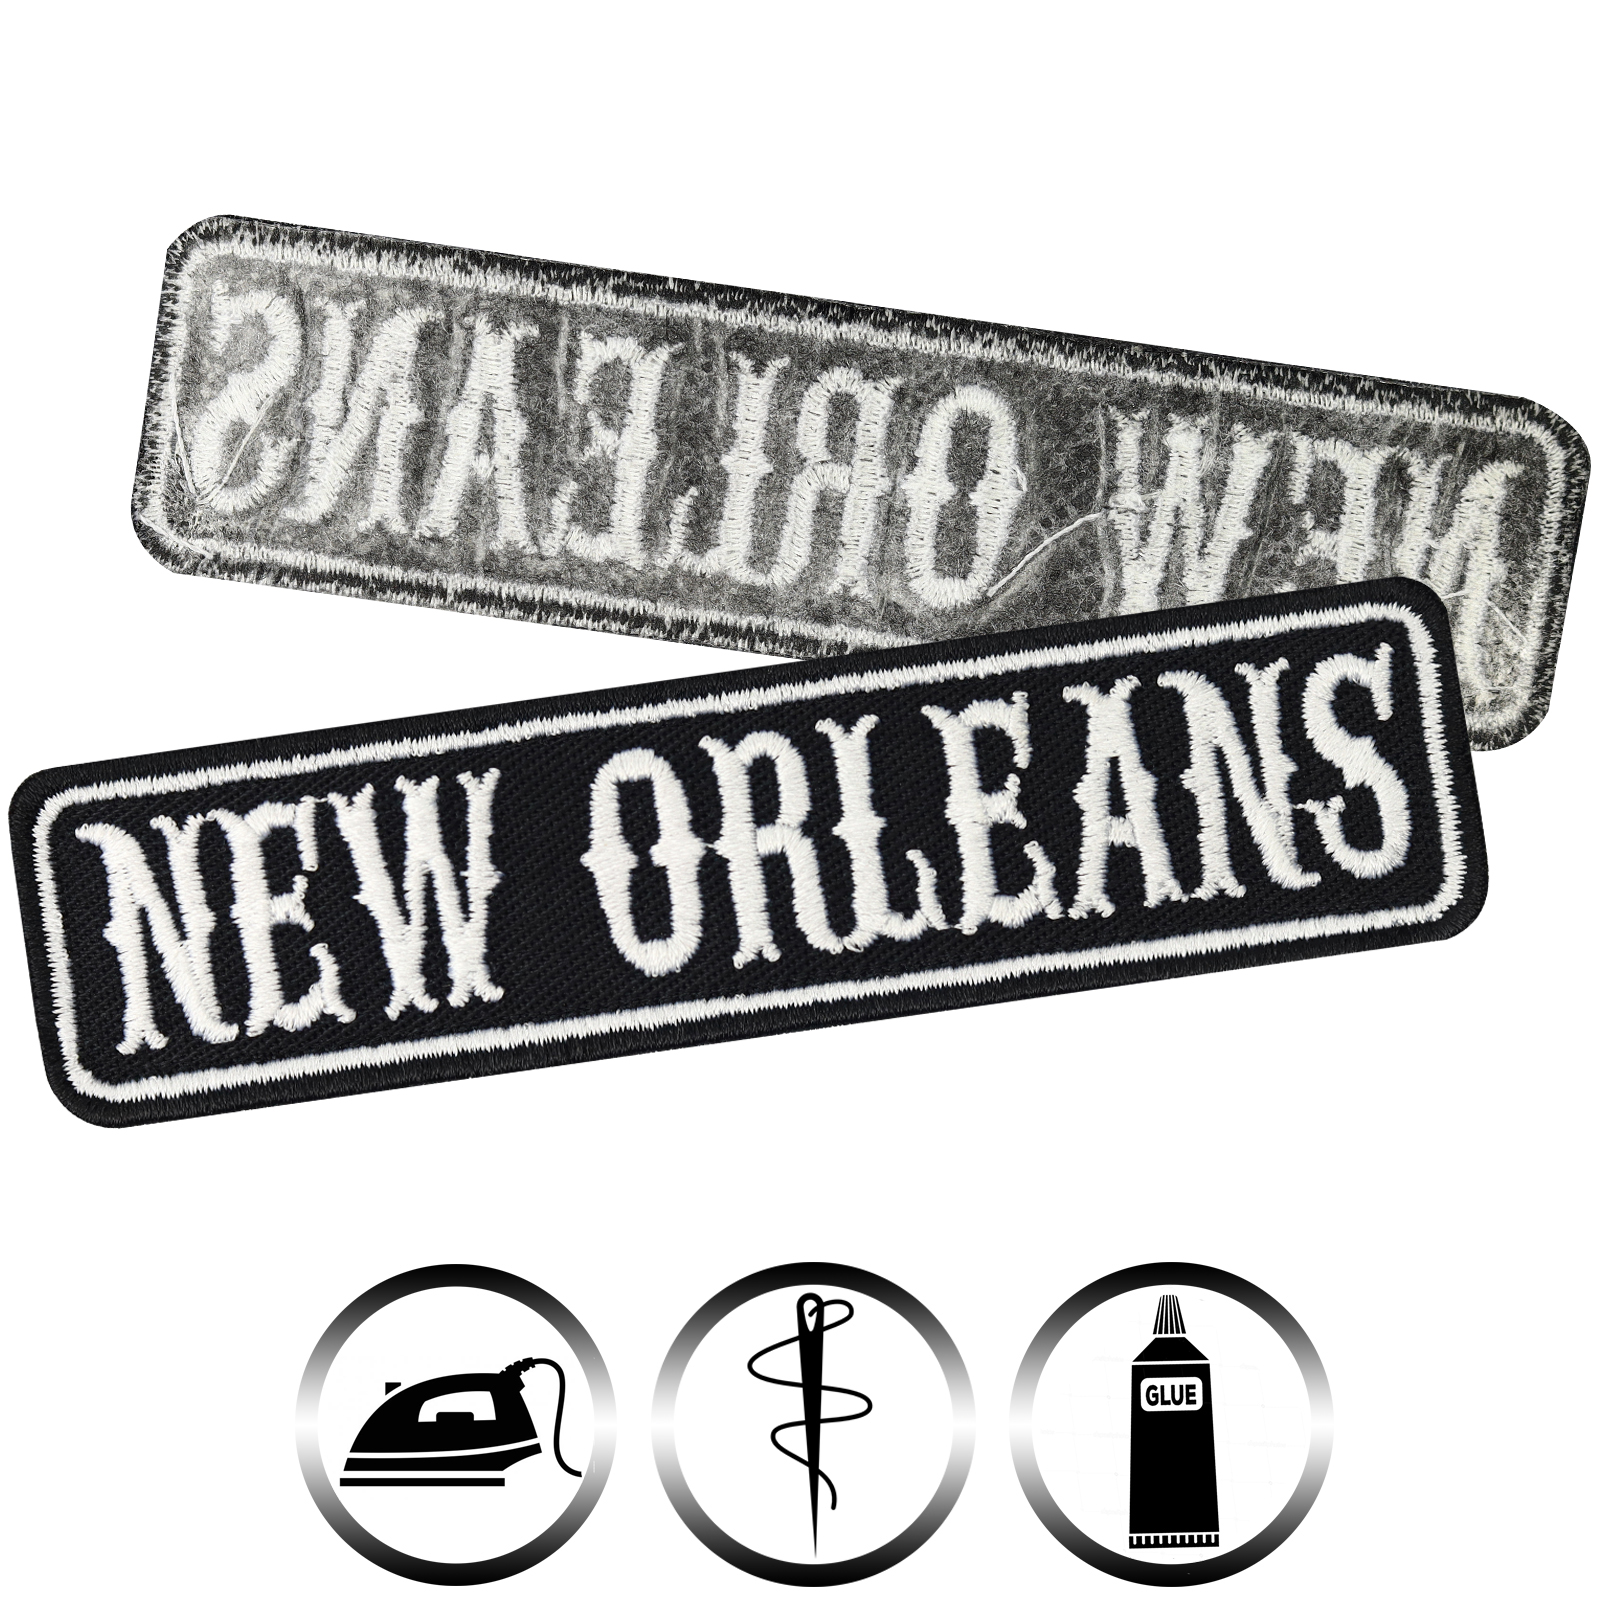 New Orleans - Patch